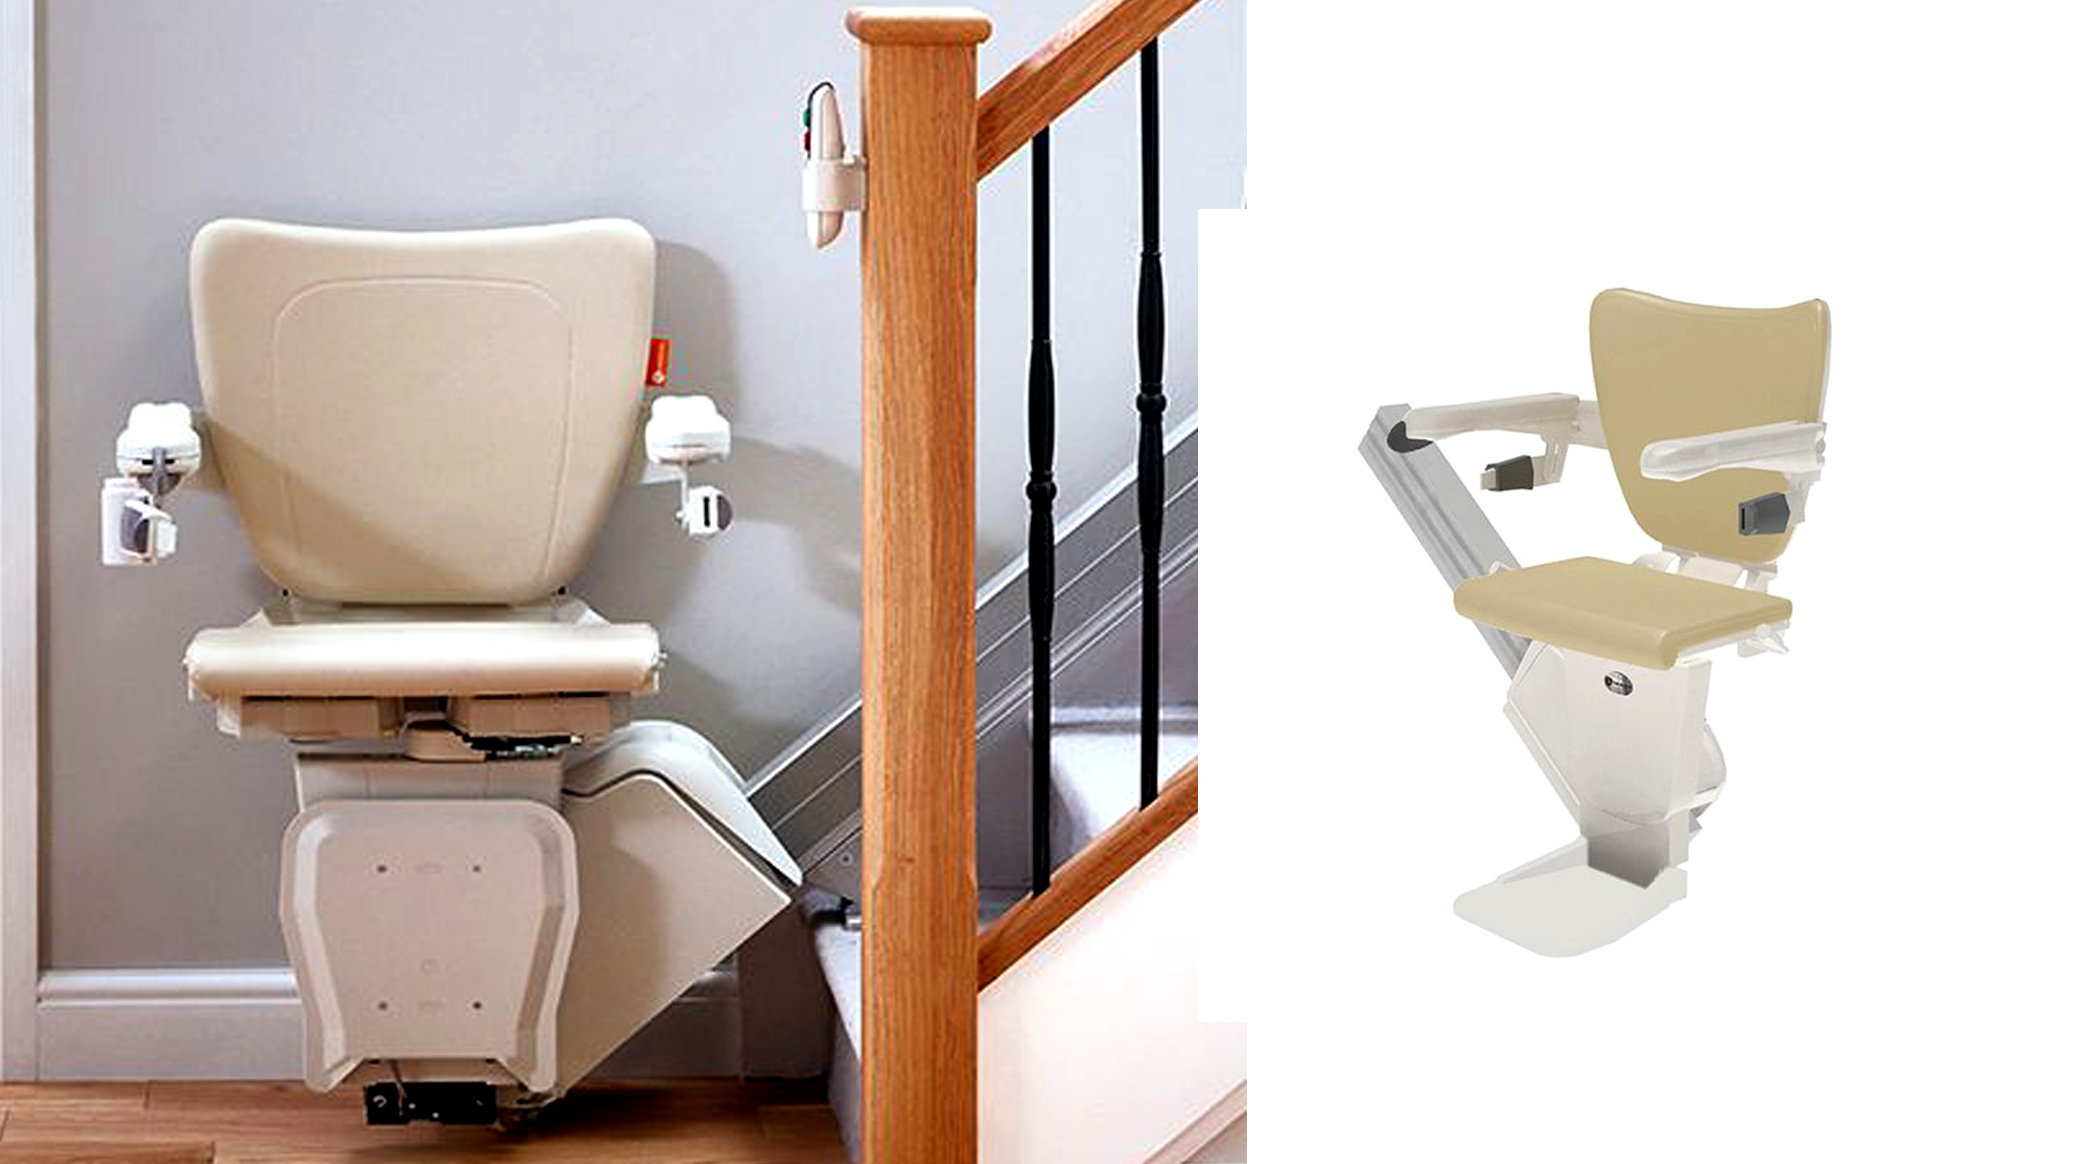 The Handicare Stairlift